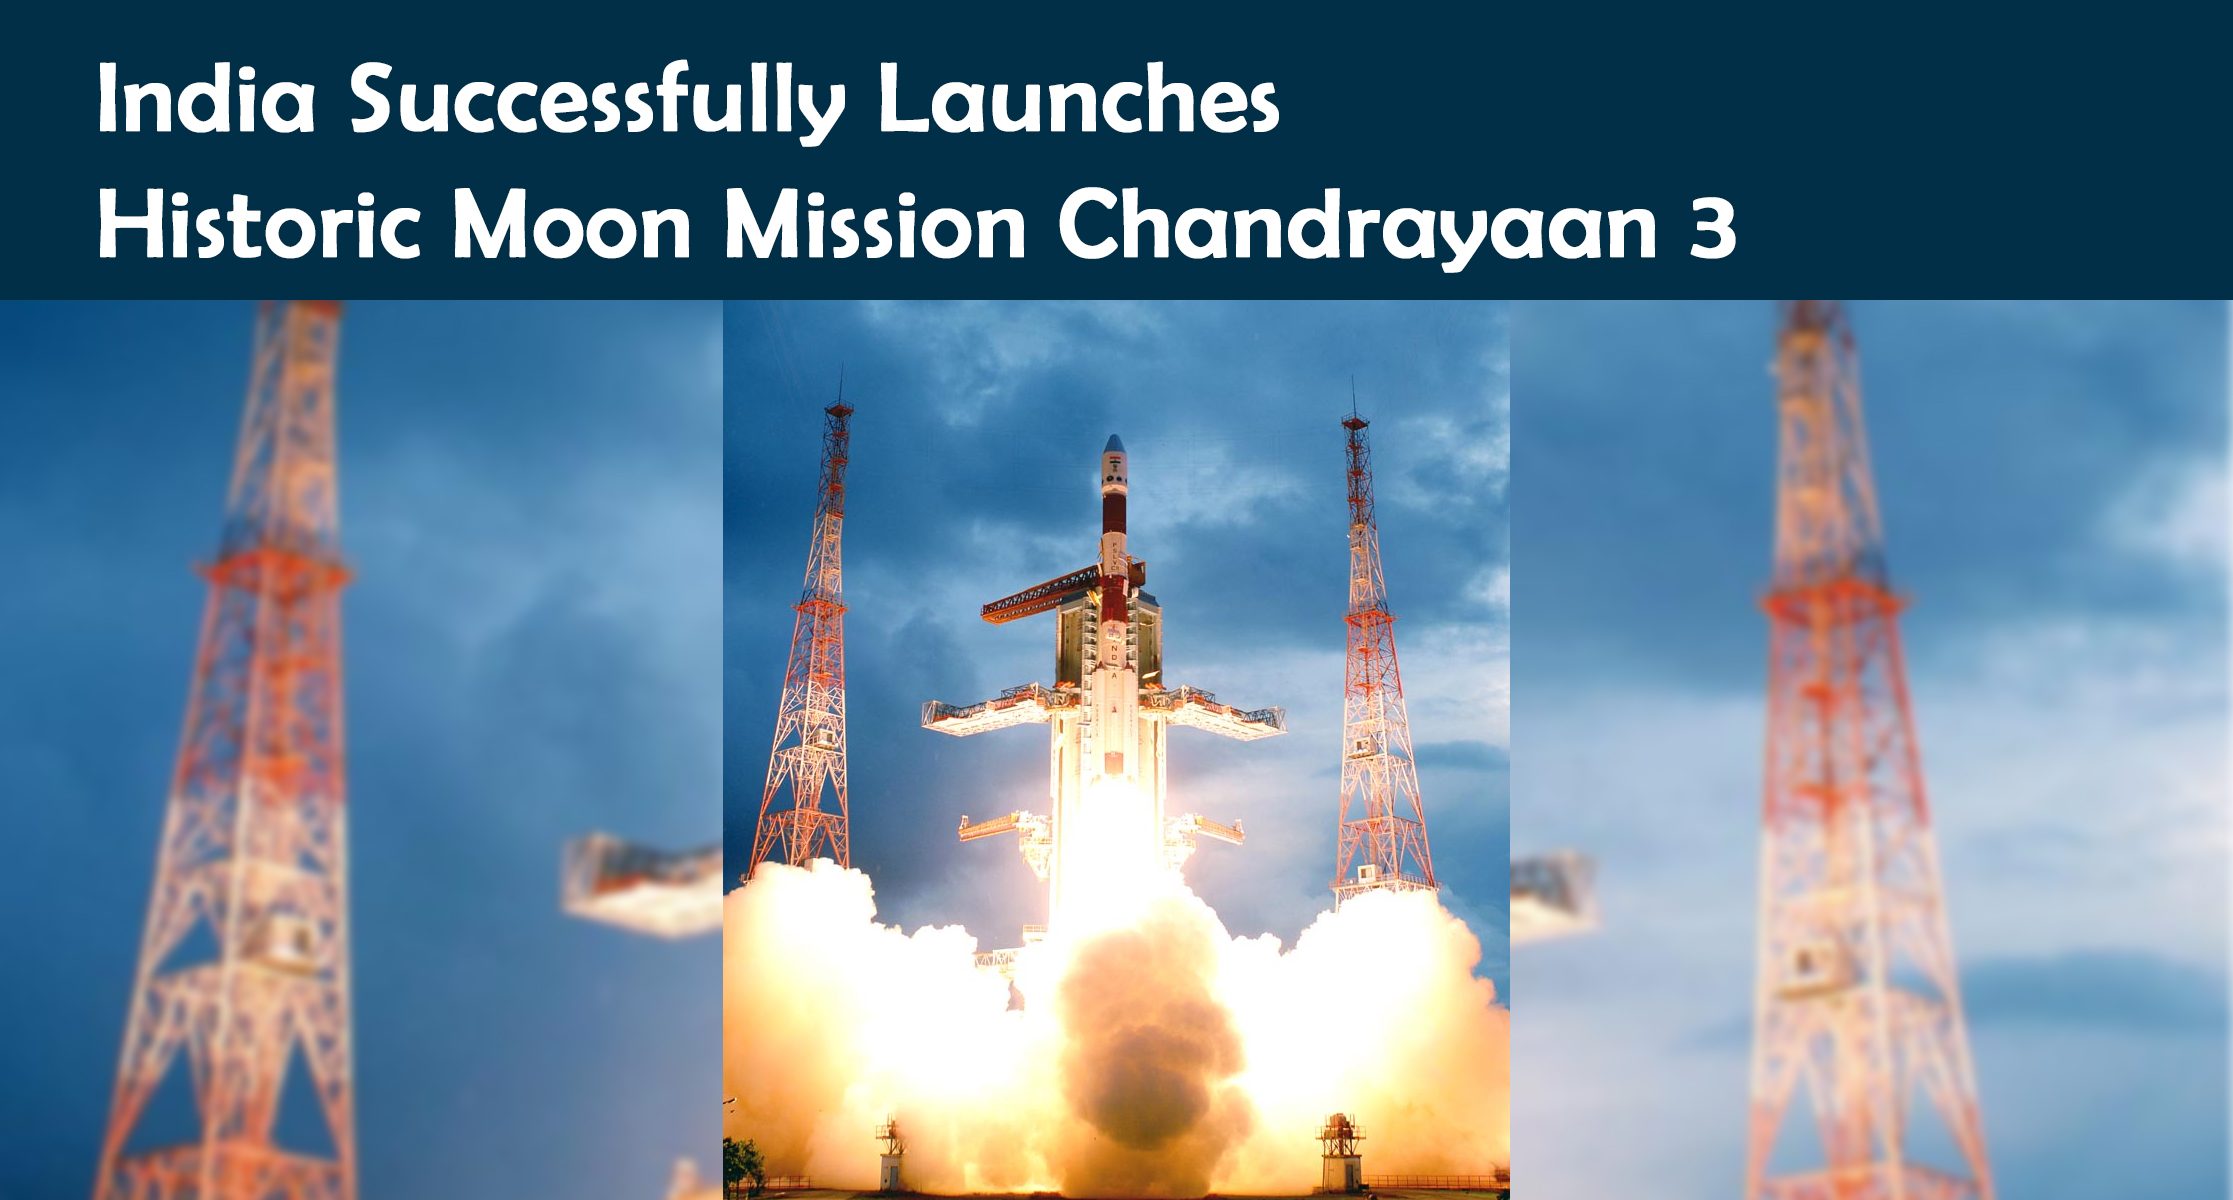 India Successfully Launches Historic Moon Mission Chandrayaan 3